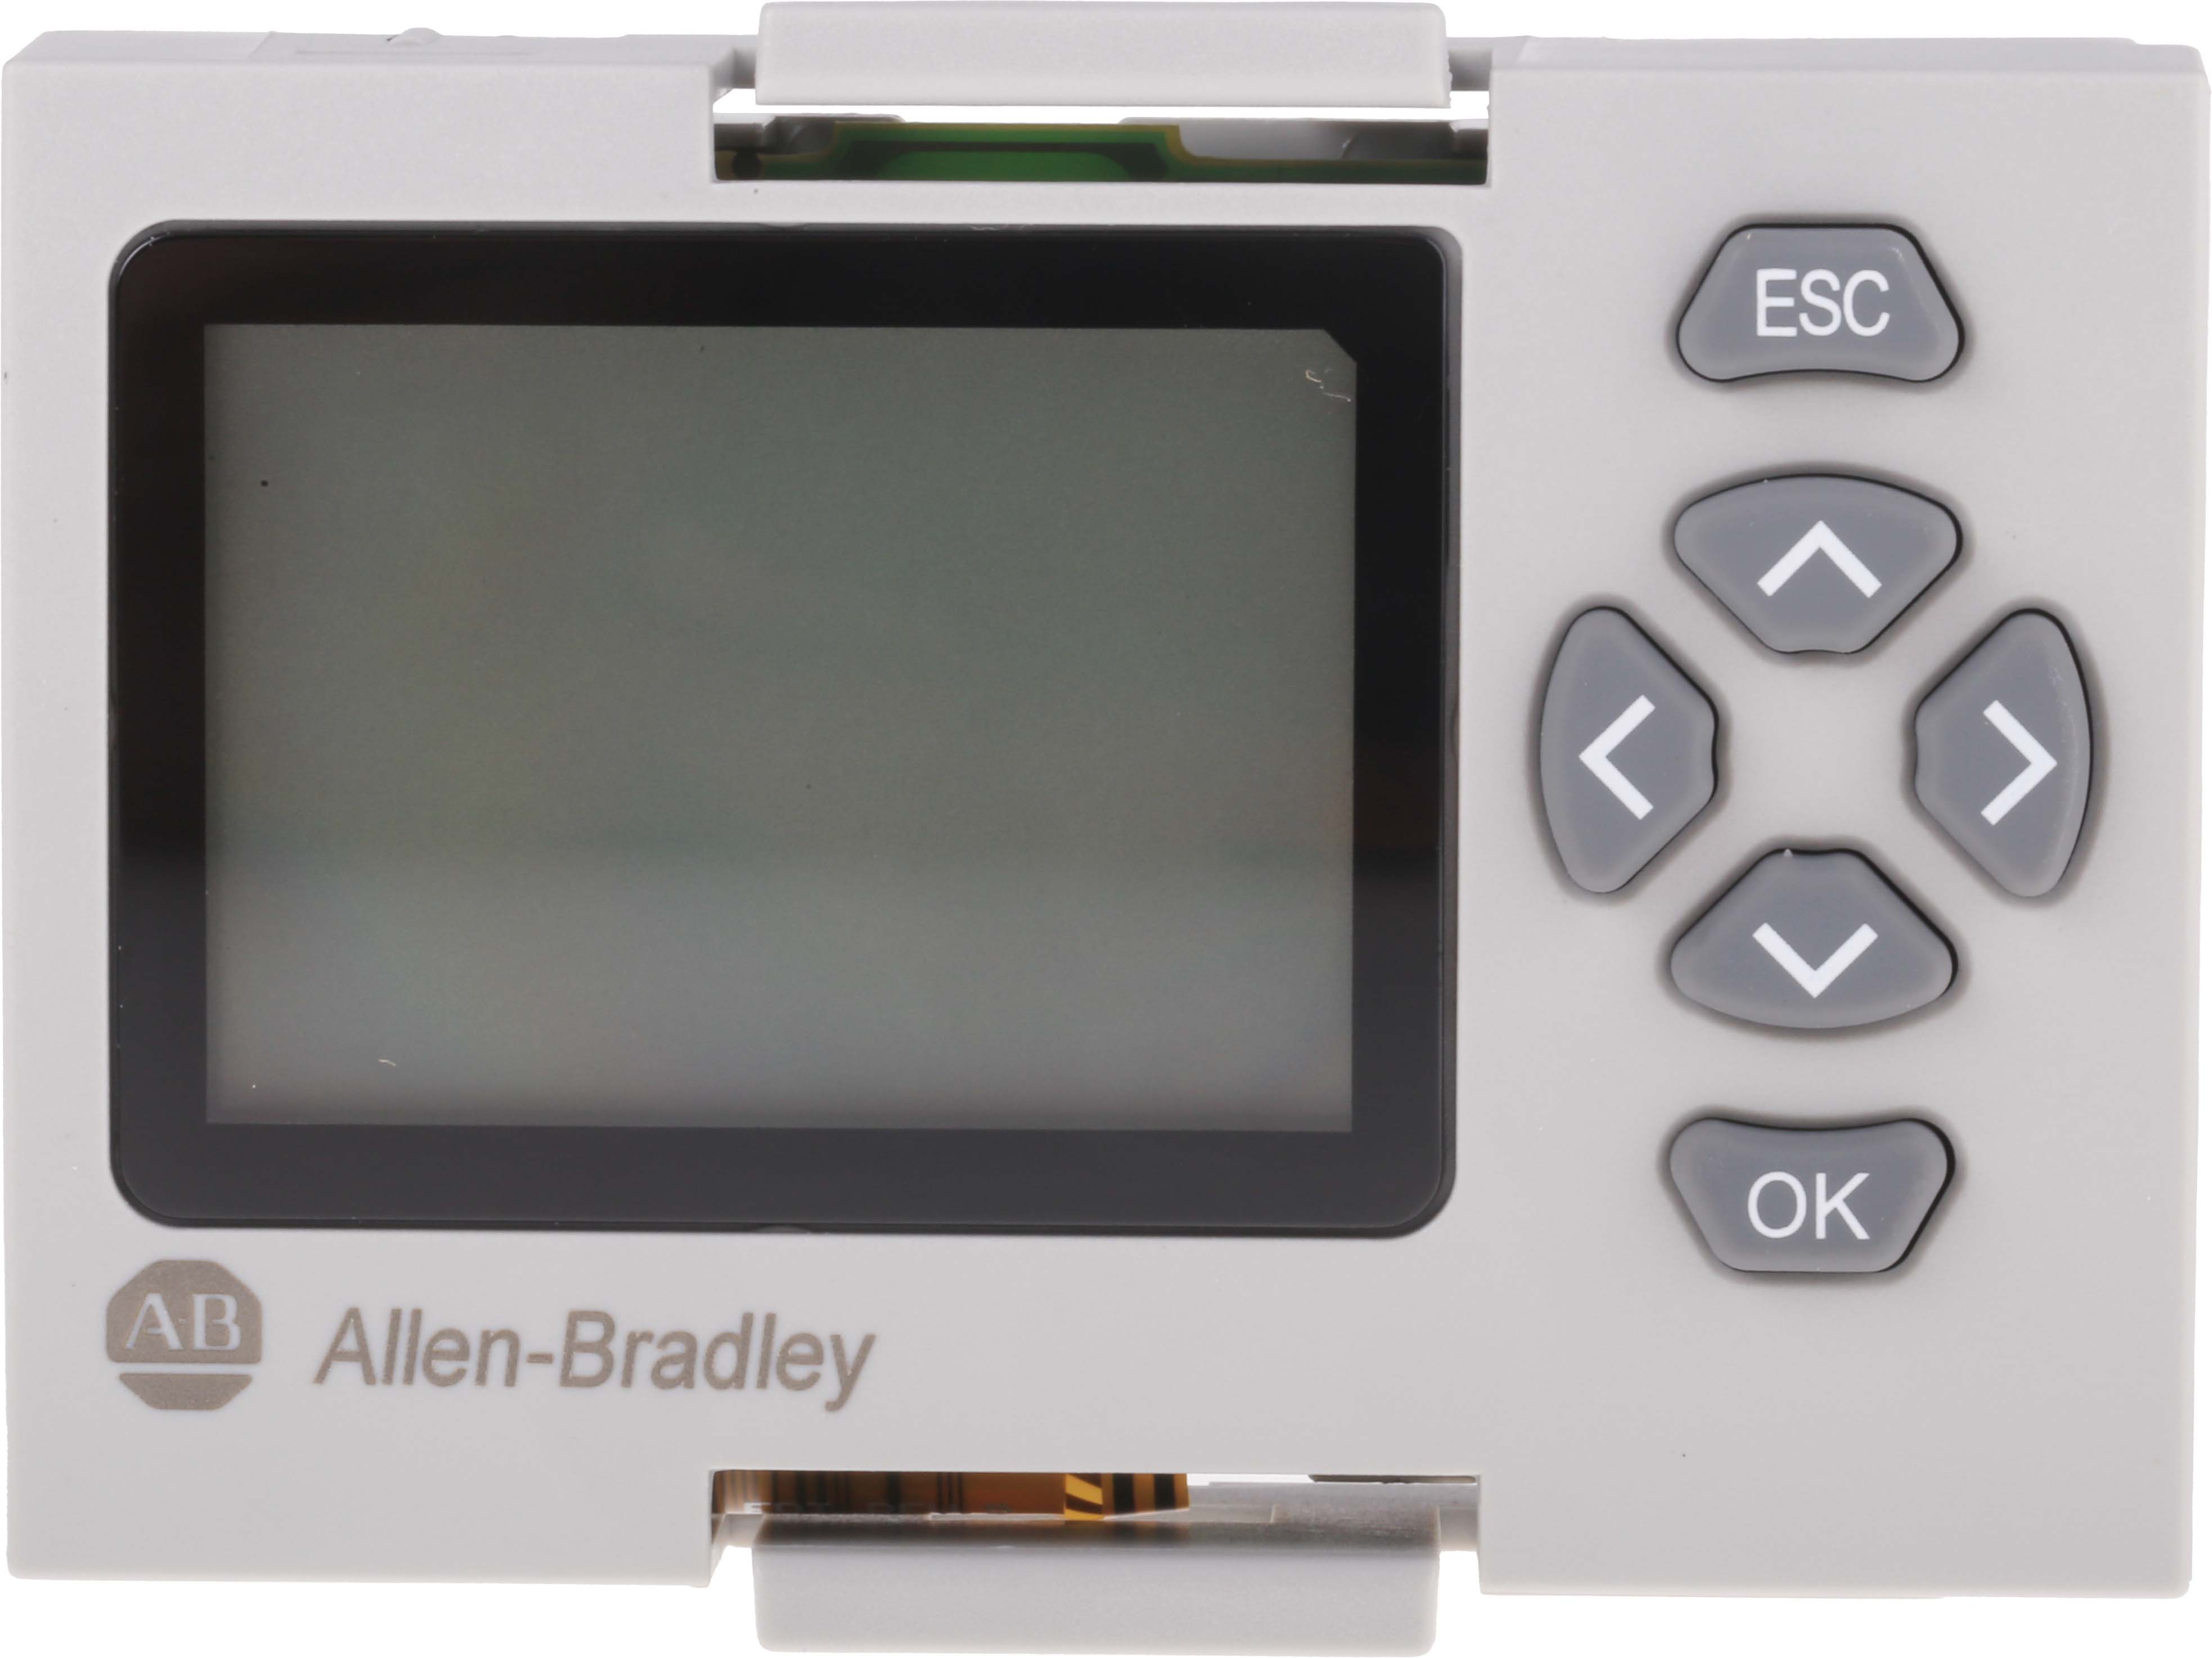 Allen Bradley Display Module for use with Micro 810 Series, Micro 800